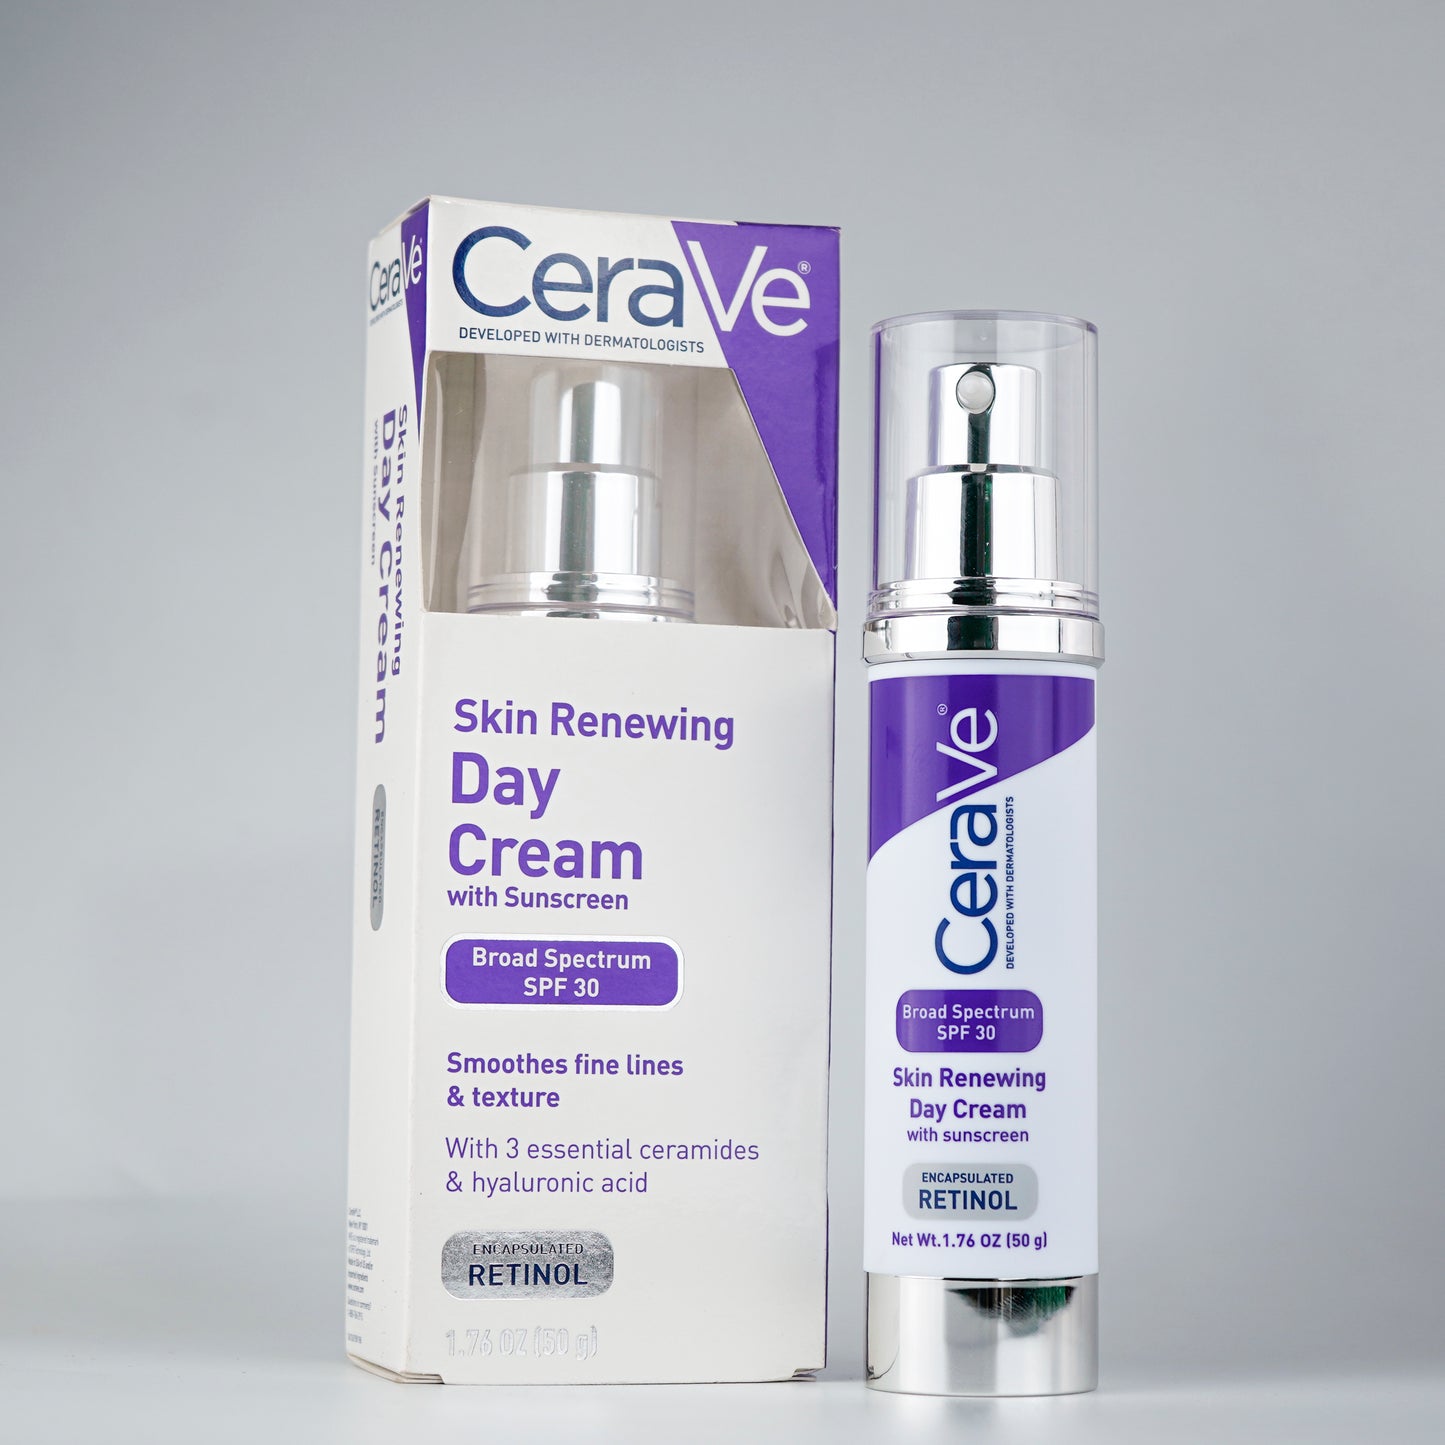 CeraVe Anti Aging Face Cream with SPF 30 Sunscreen | Anti Wrinkle Cream for Face with Retinol, SPF 30 Sunscreen, Hyaluronic Acid, and Ceramides